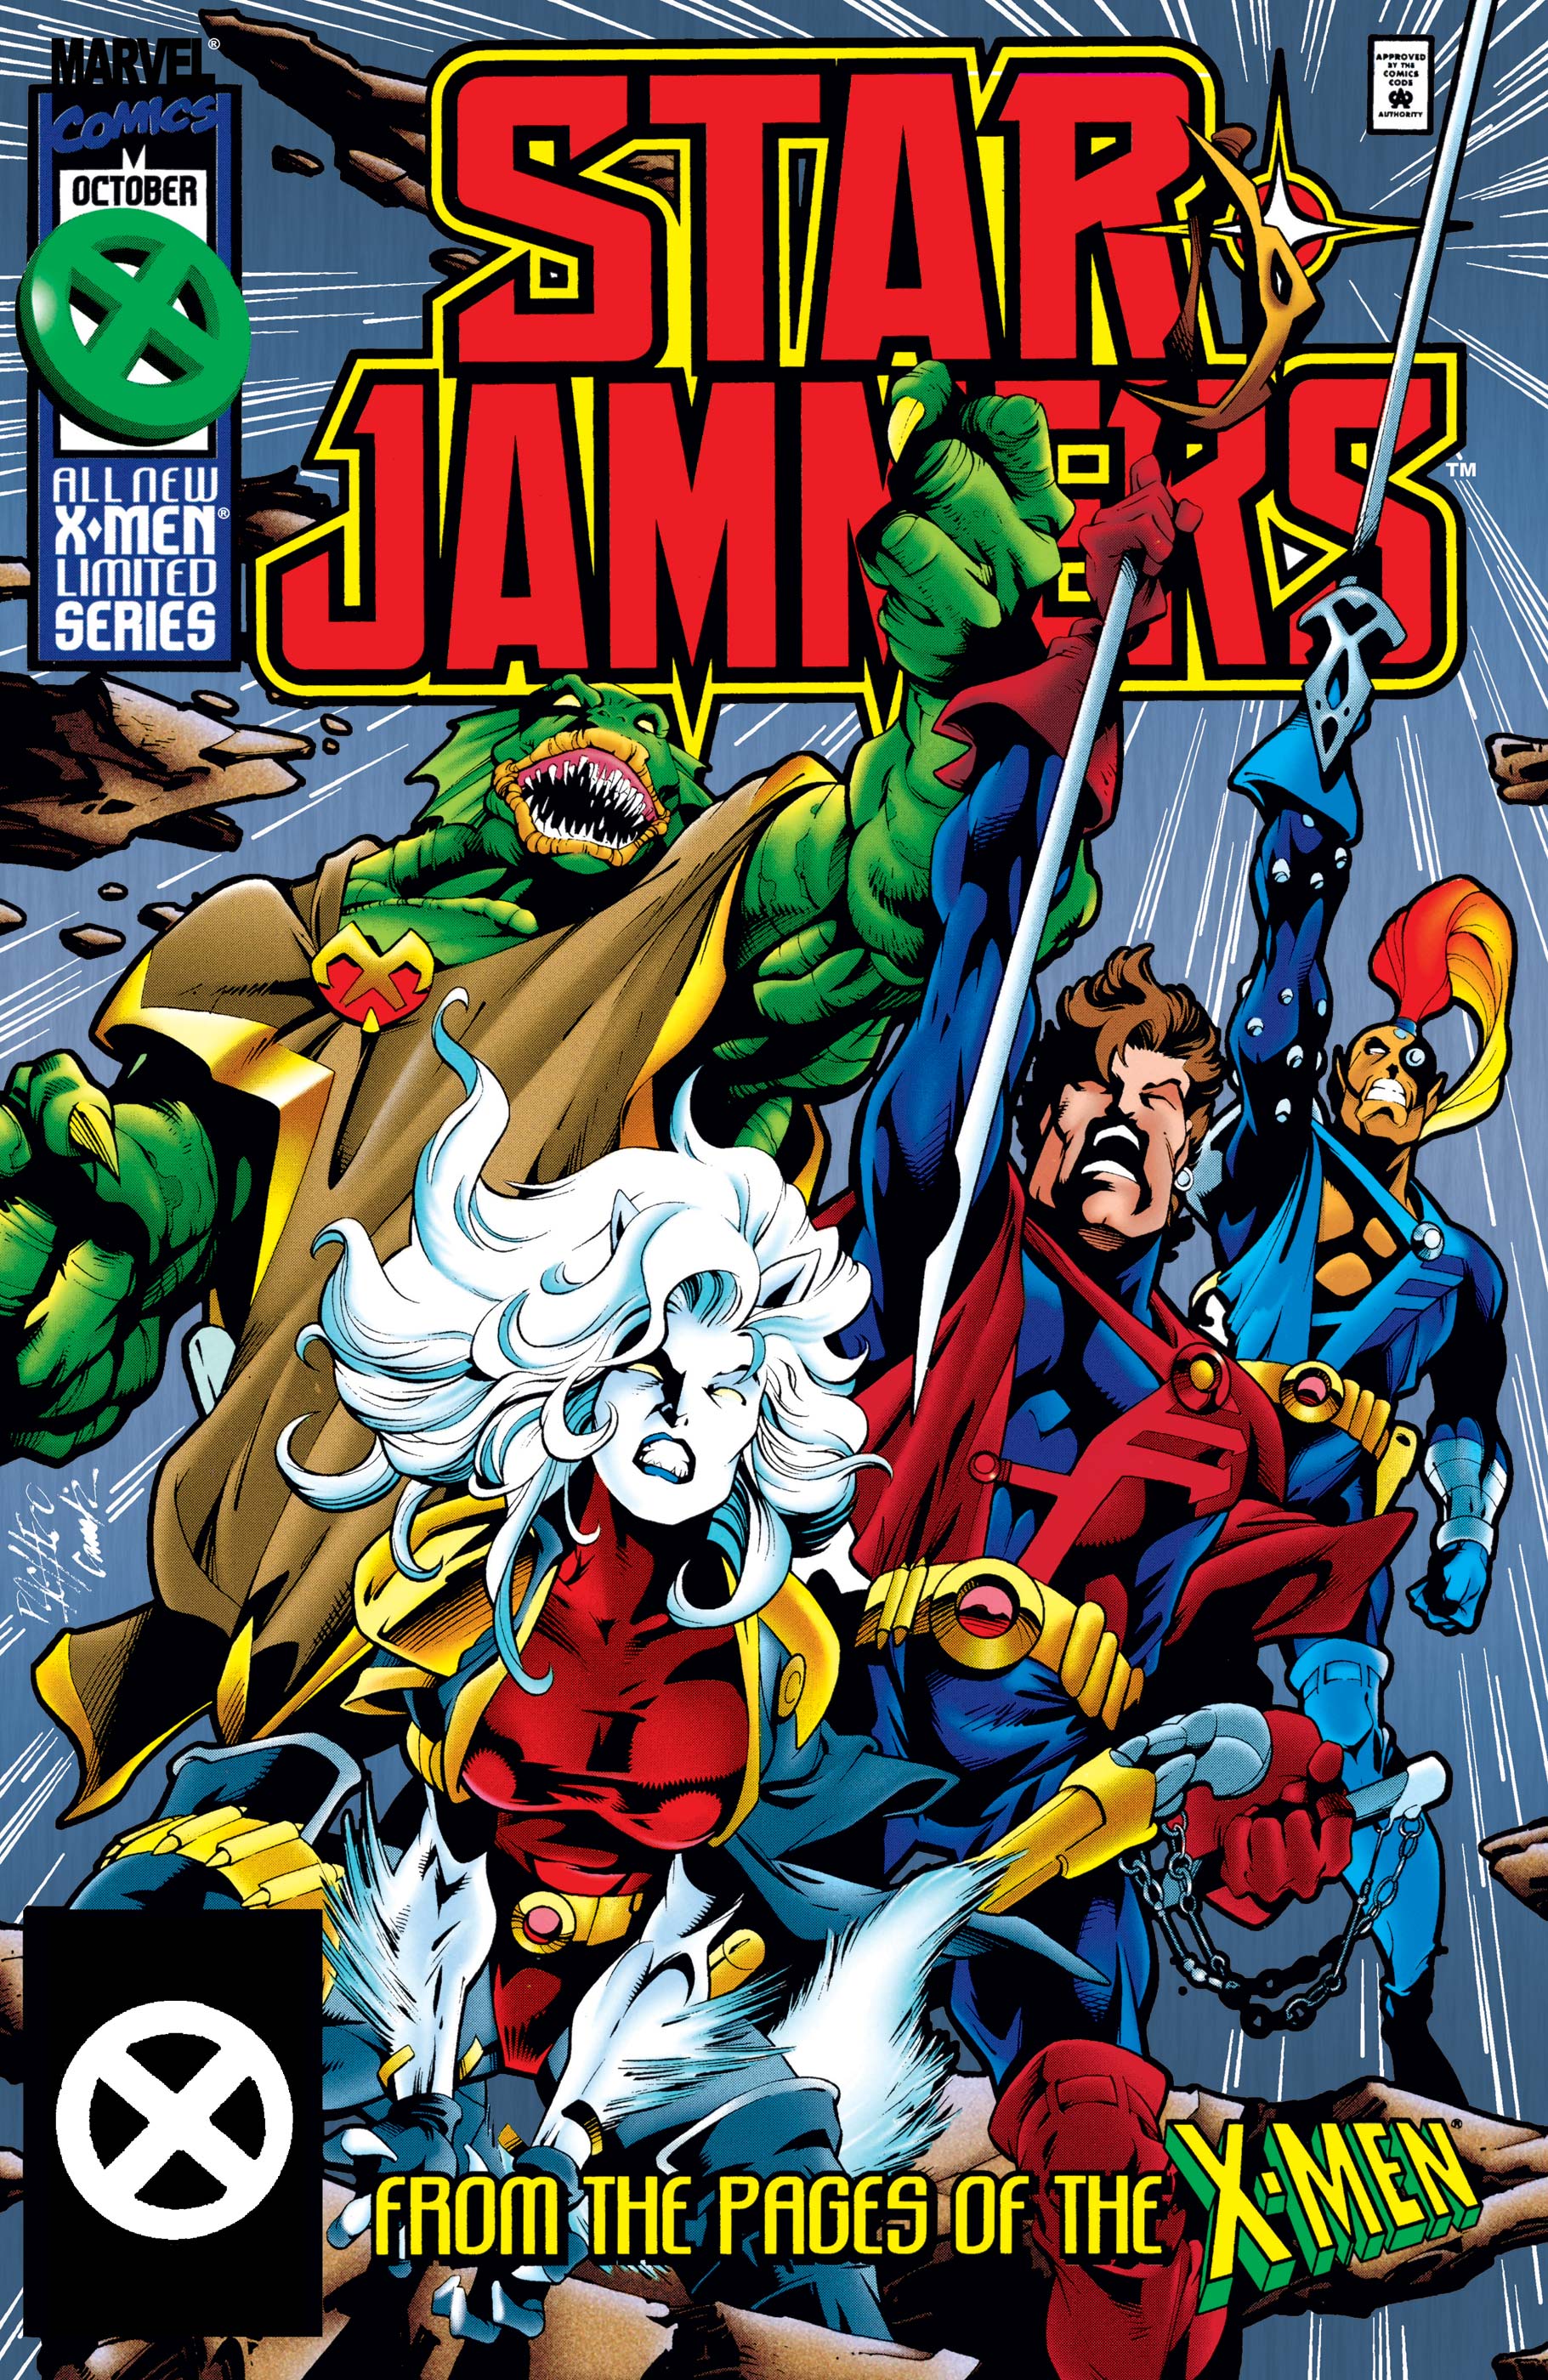 Starjammers (1995) #1